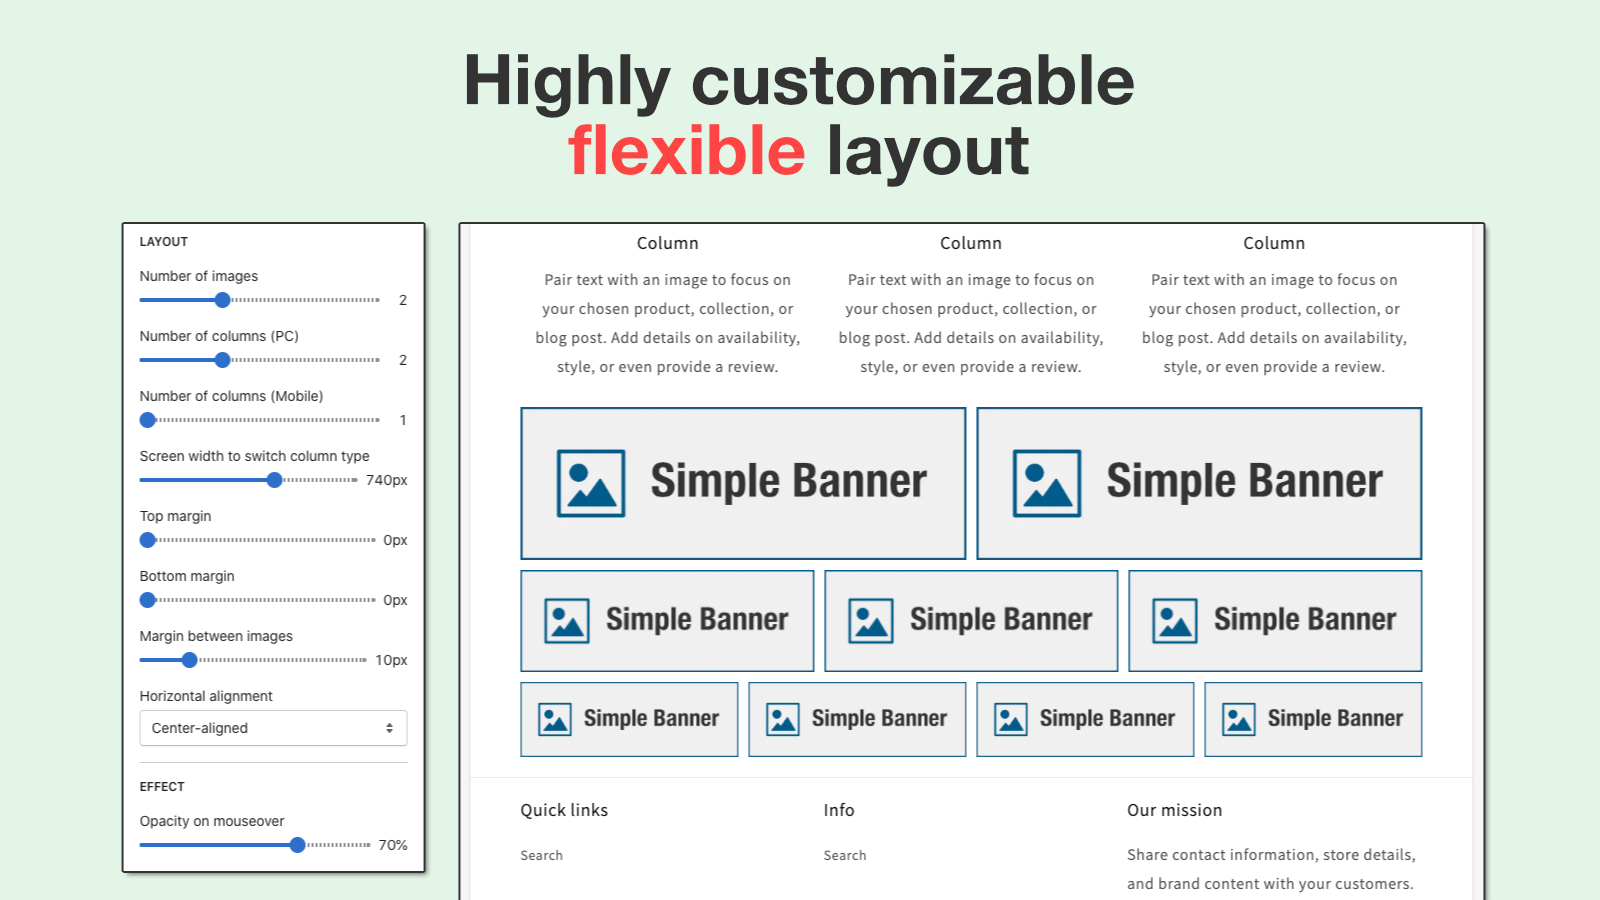 Highly customizable flexible layout